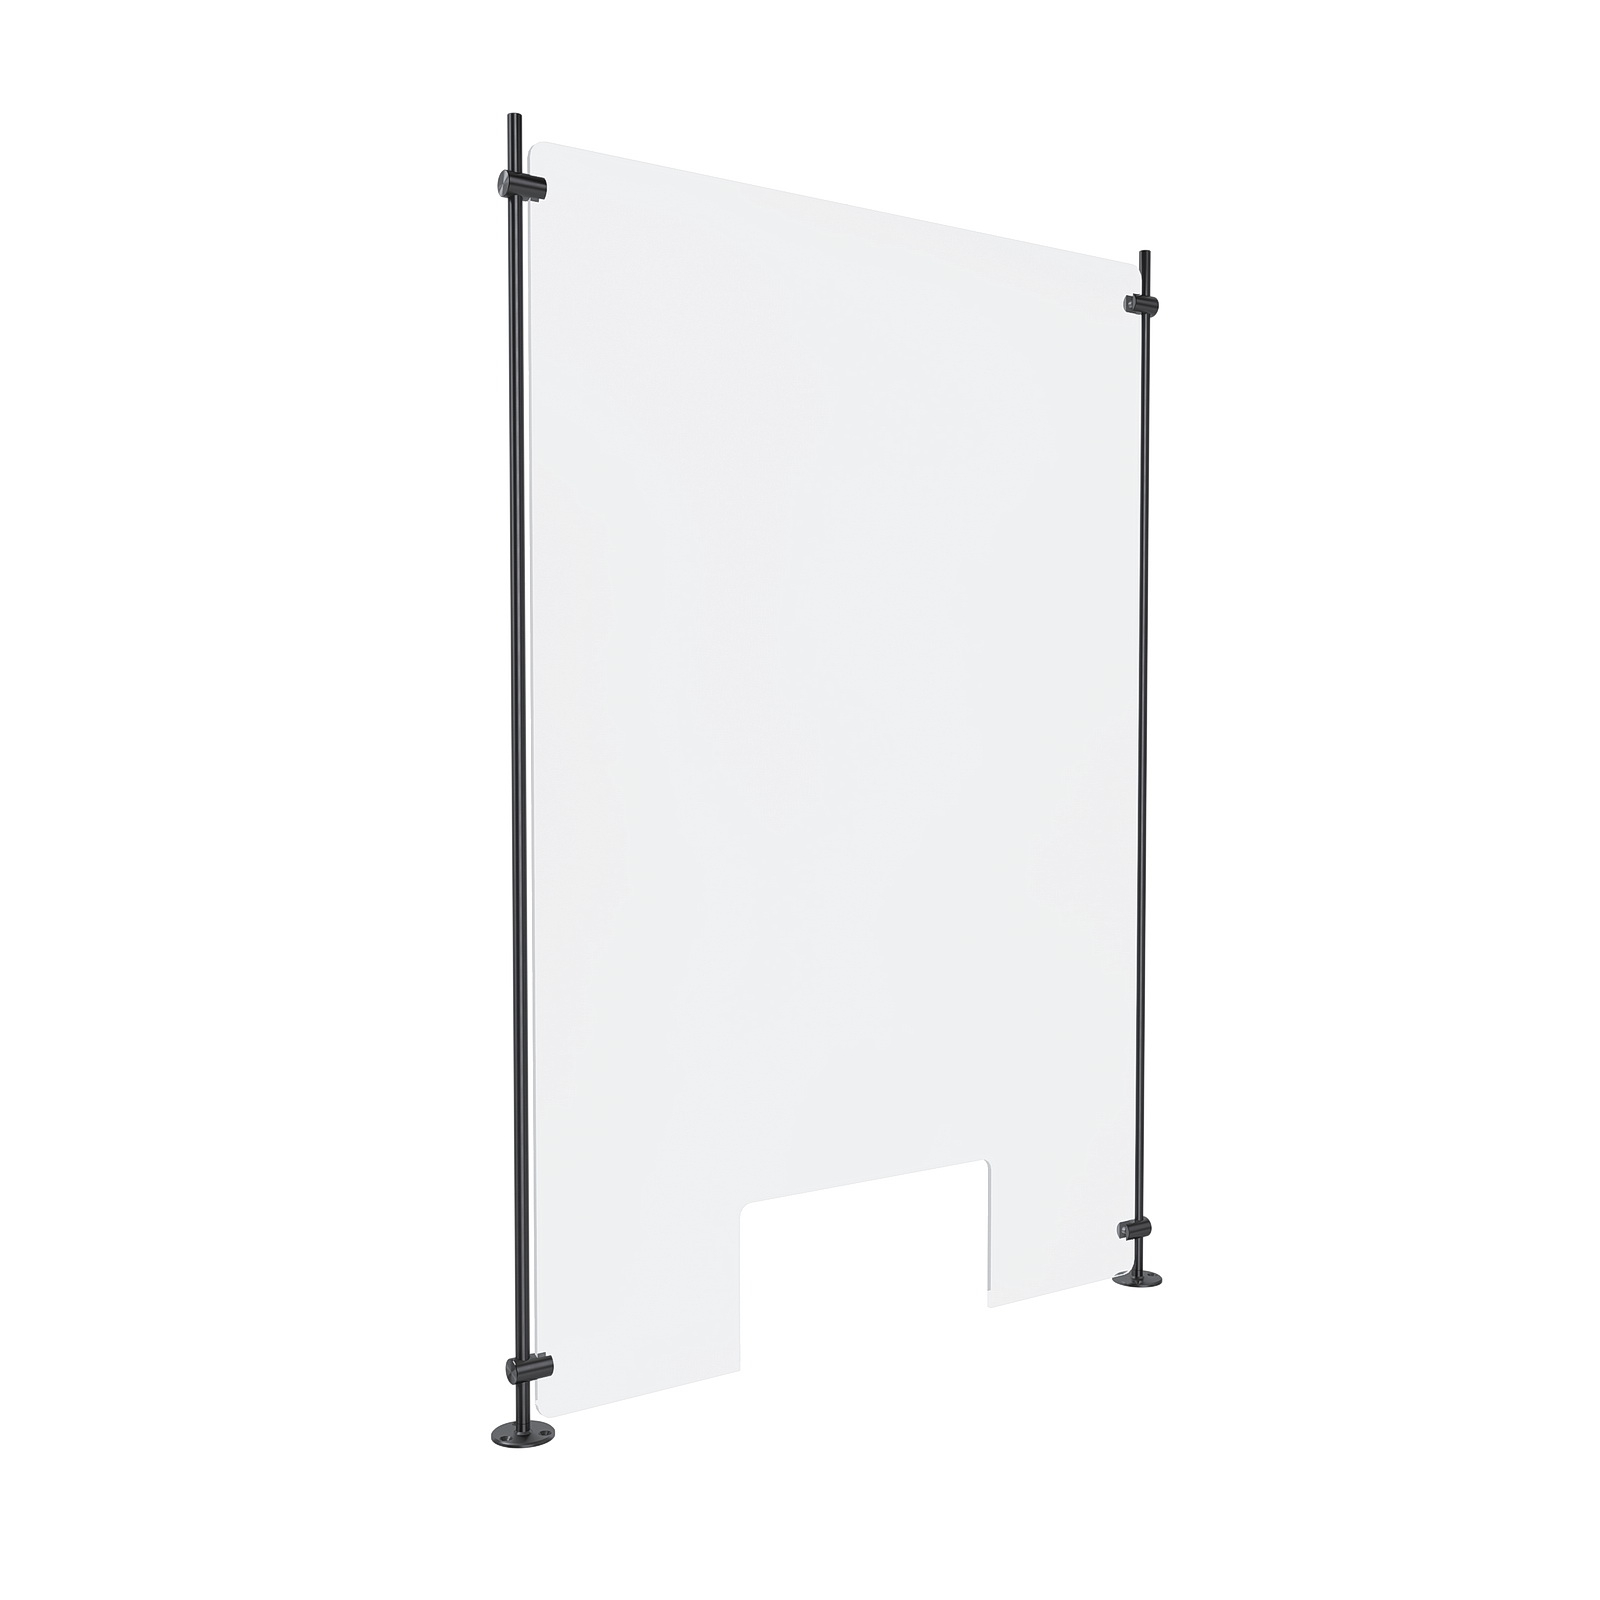 Clear Acrylic Sneeze Guard 23-1/2'' Wide x 35'' Tall (10'' x 5'' Cut Out), with (2) 36'' Tall x 3/8'' Diameter Matte Black Anodized Aluminum Rods on the Side